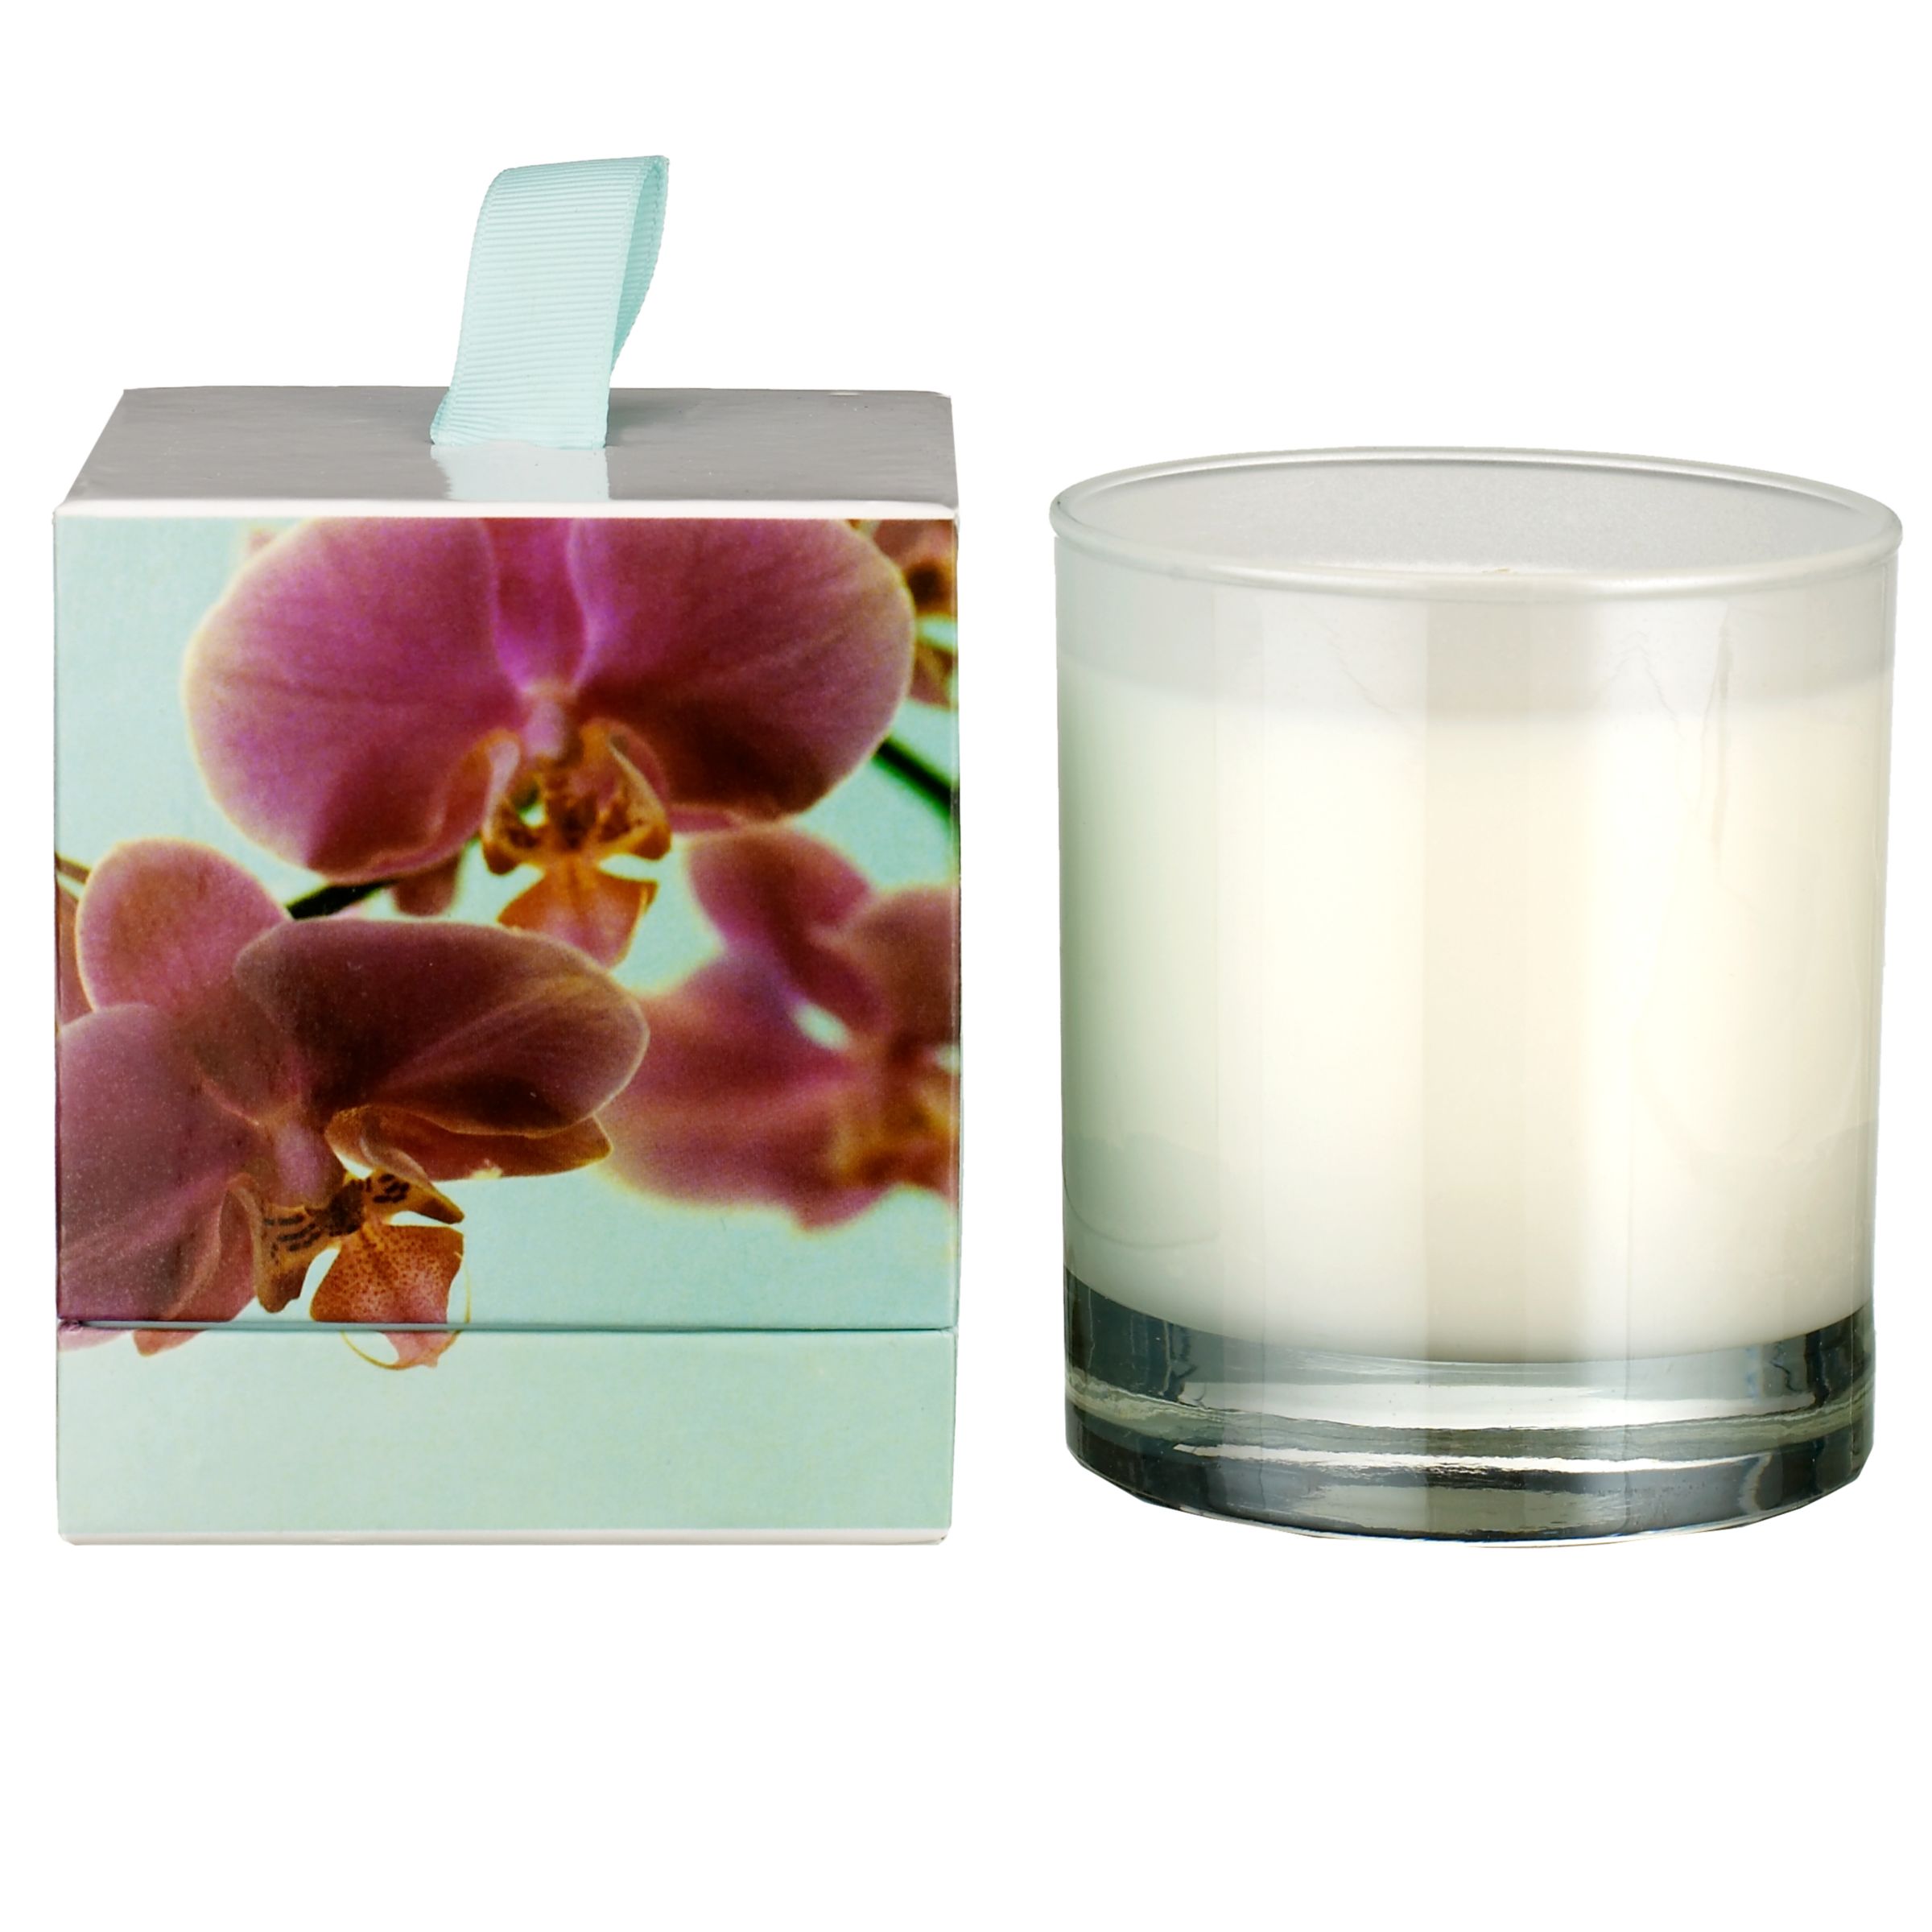 Orchid Candle